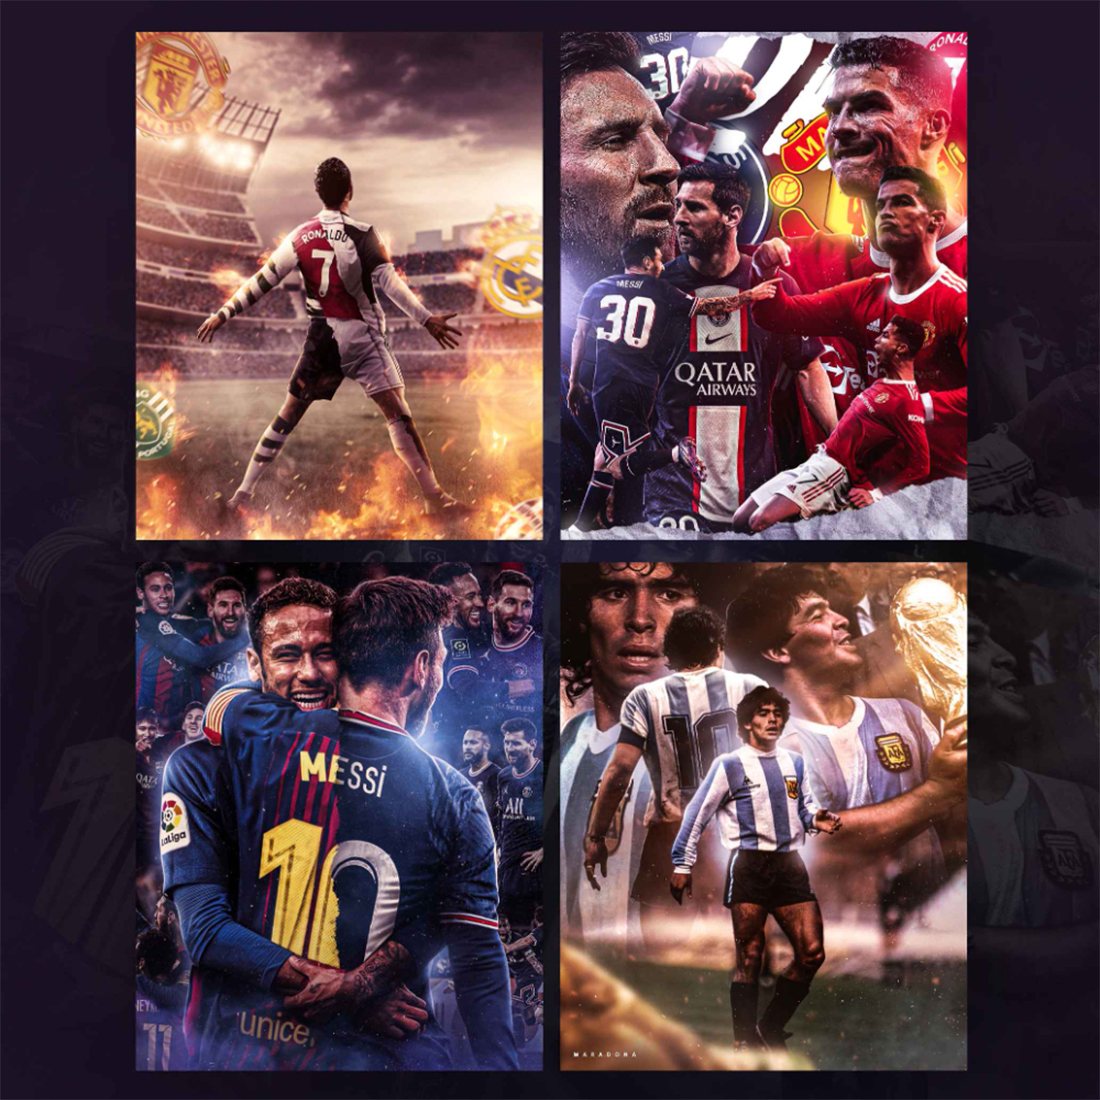 Best Football Posters, High Quality and full resolution, Fill your room with high quality posters!! preview image.